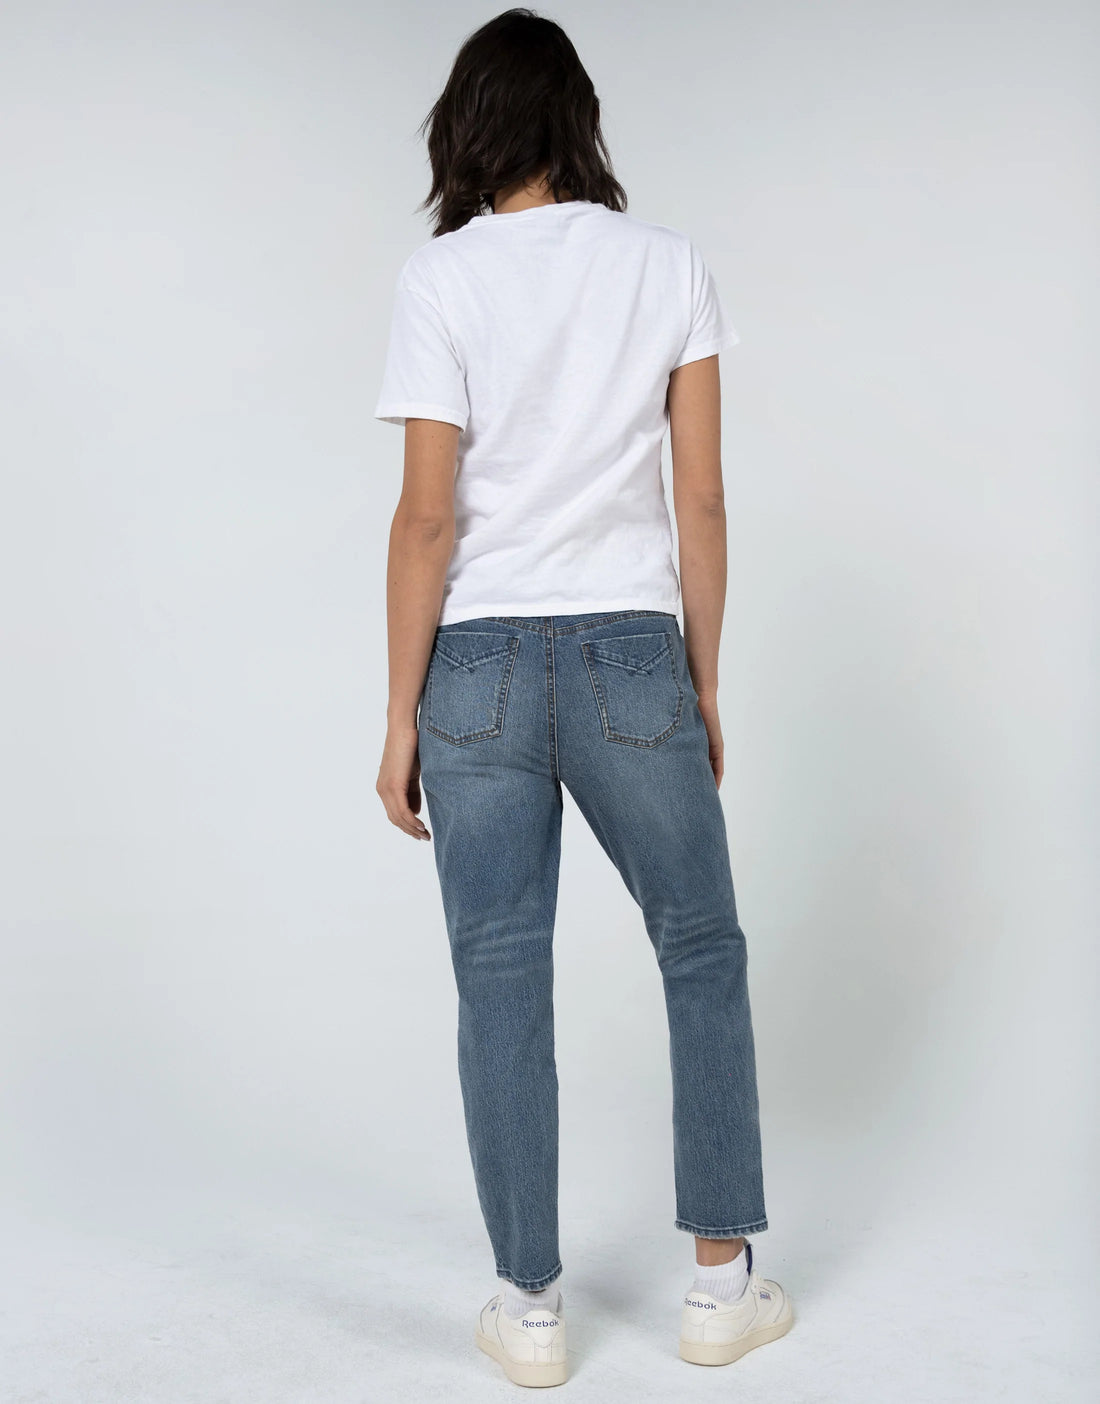 Brooke Loose Straight Jeans - Sawyer  Bottom clothes, Straight jeans,  Petite pants